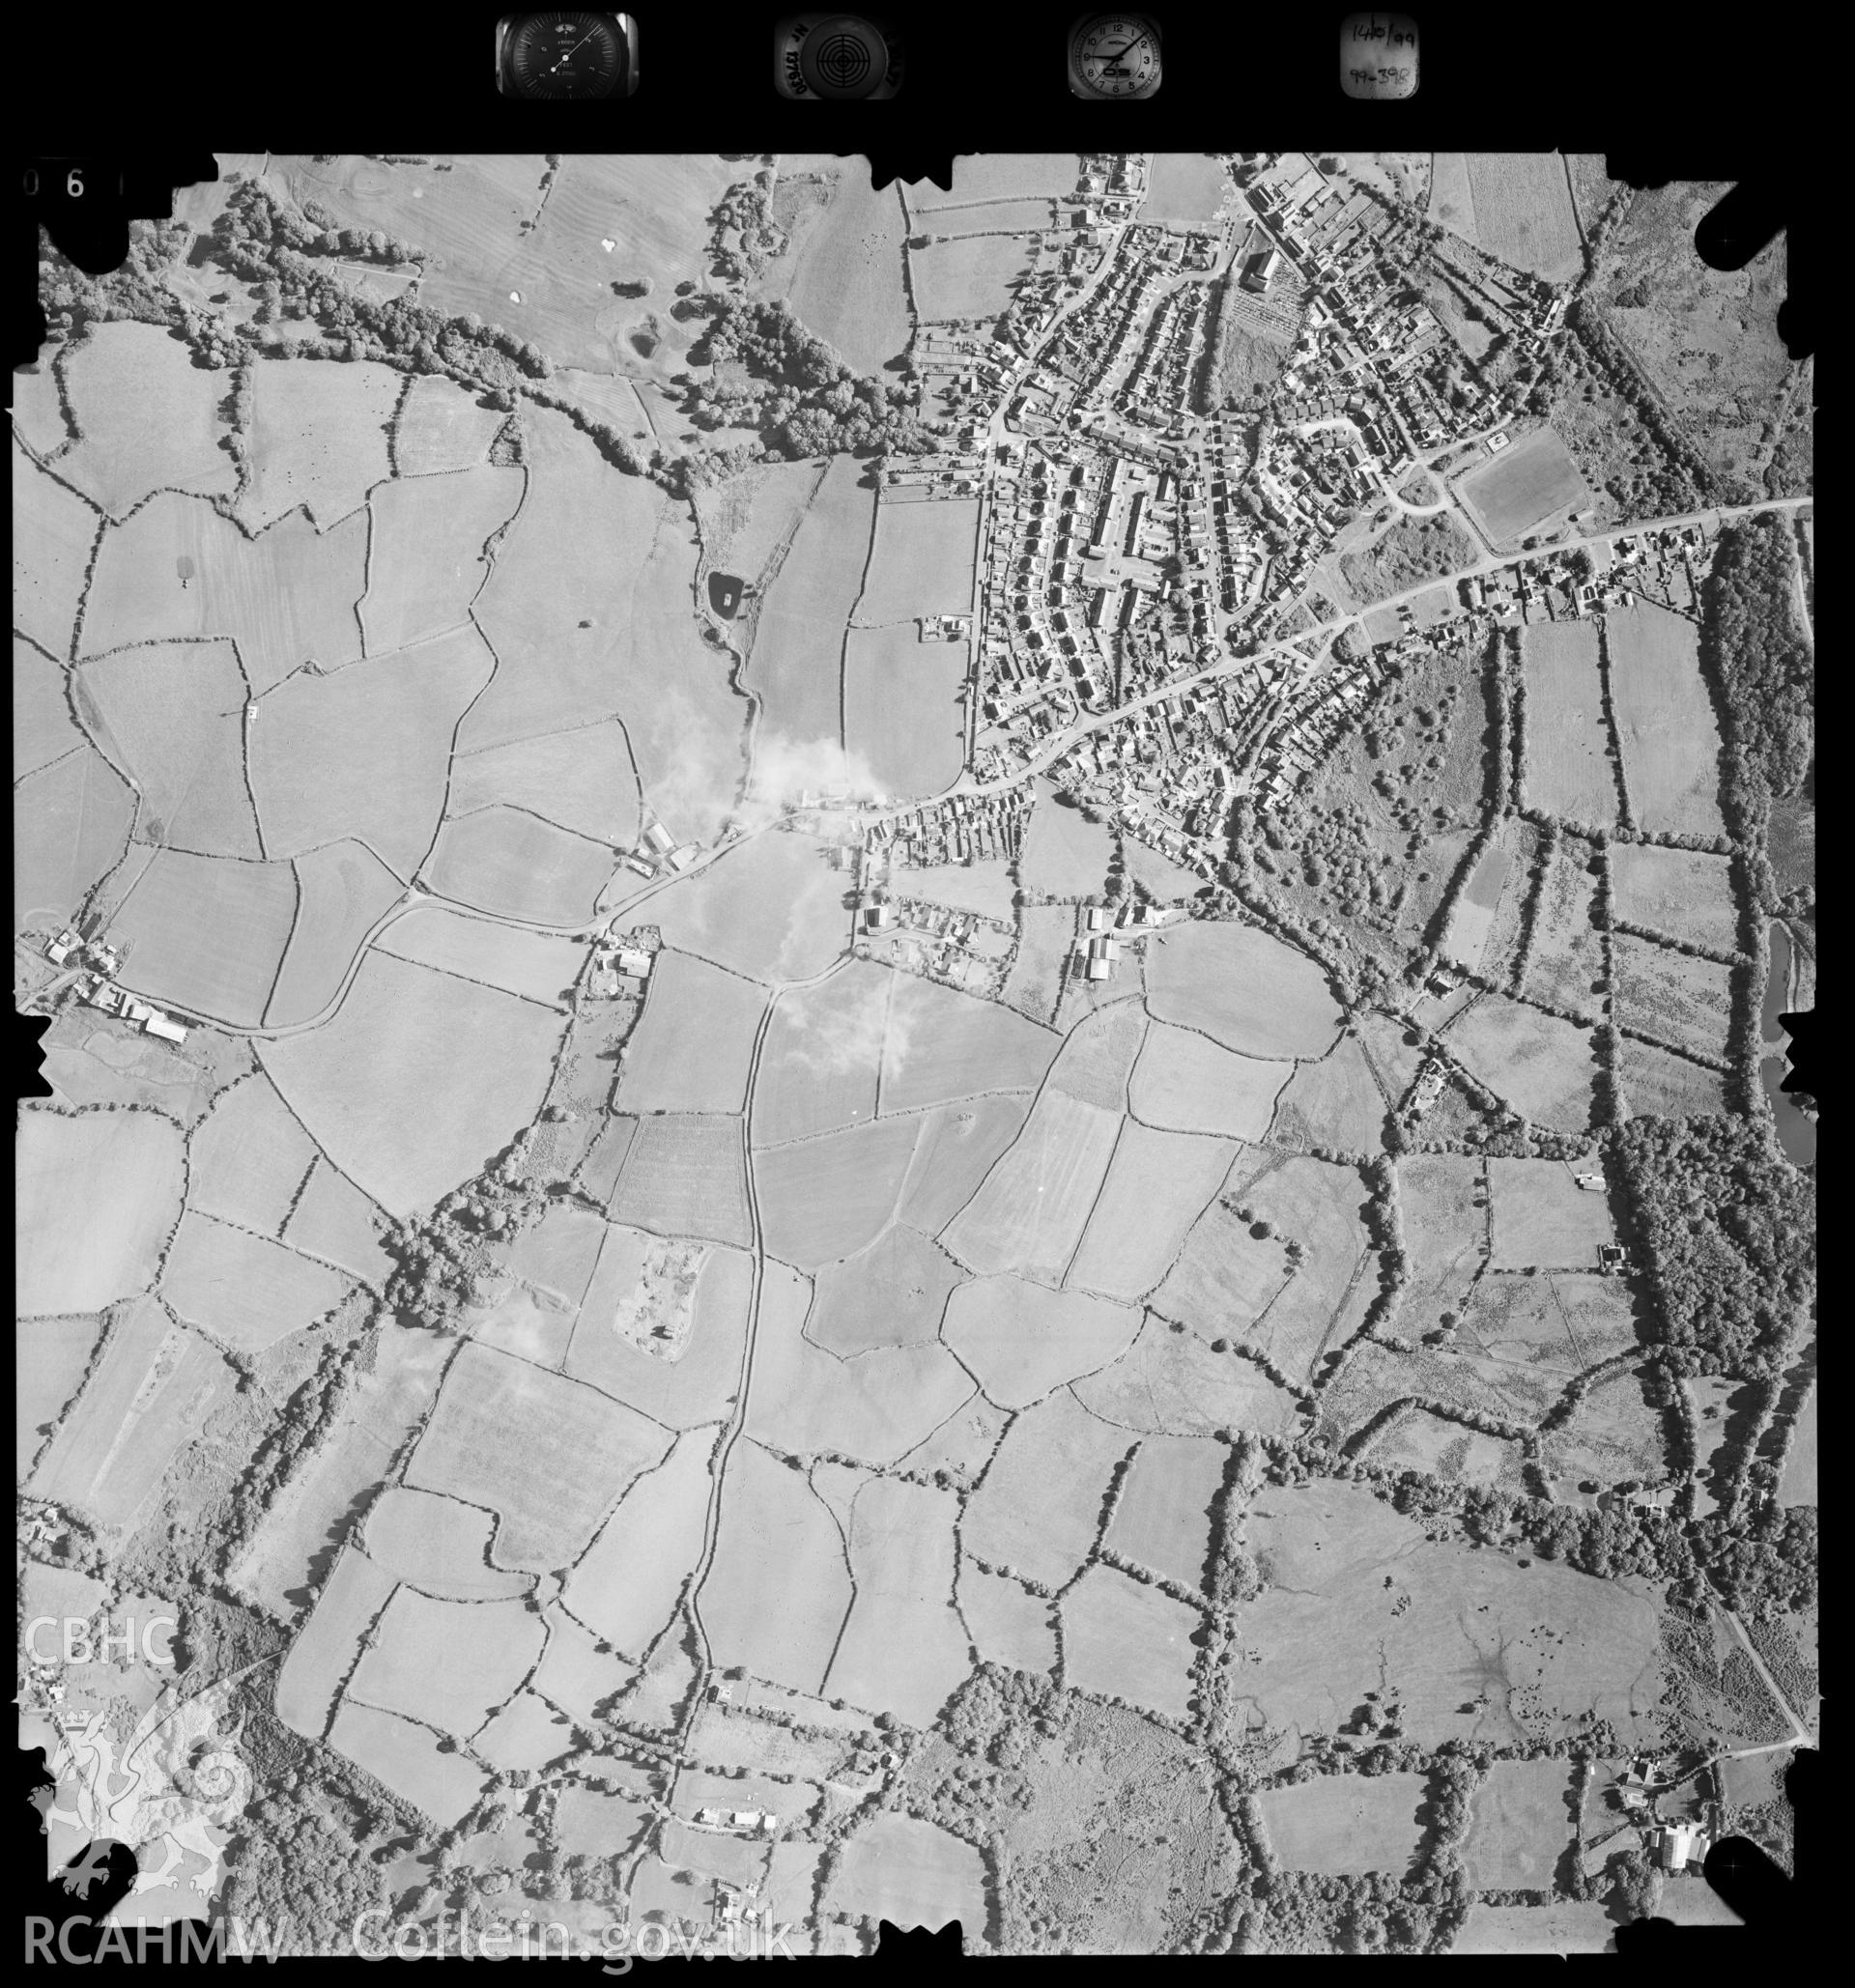 Digitized copy of an aerial photograph showing the Three Crosses area on the Gower, taken by Ordnance Survey, 1999.